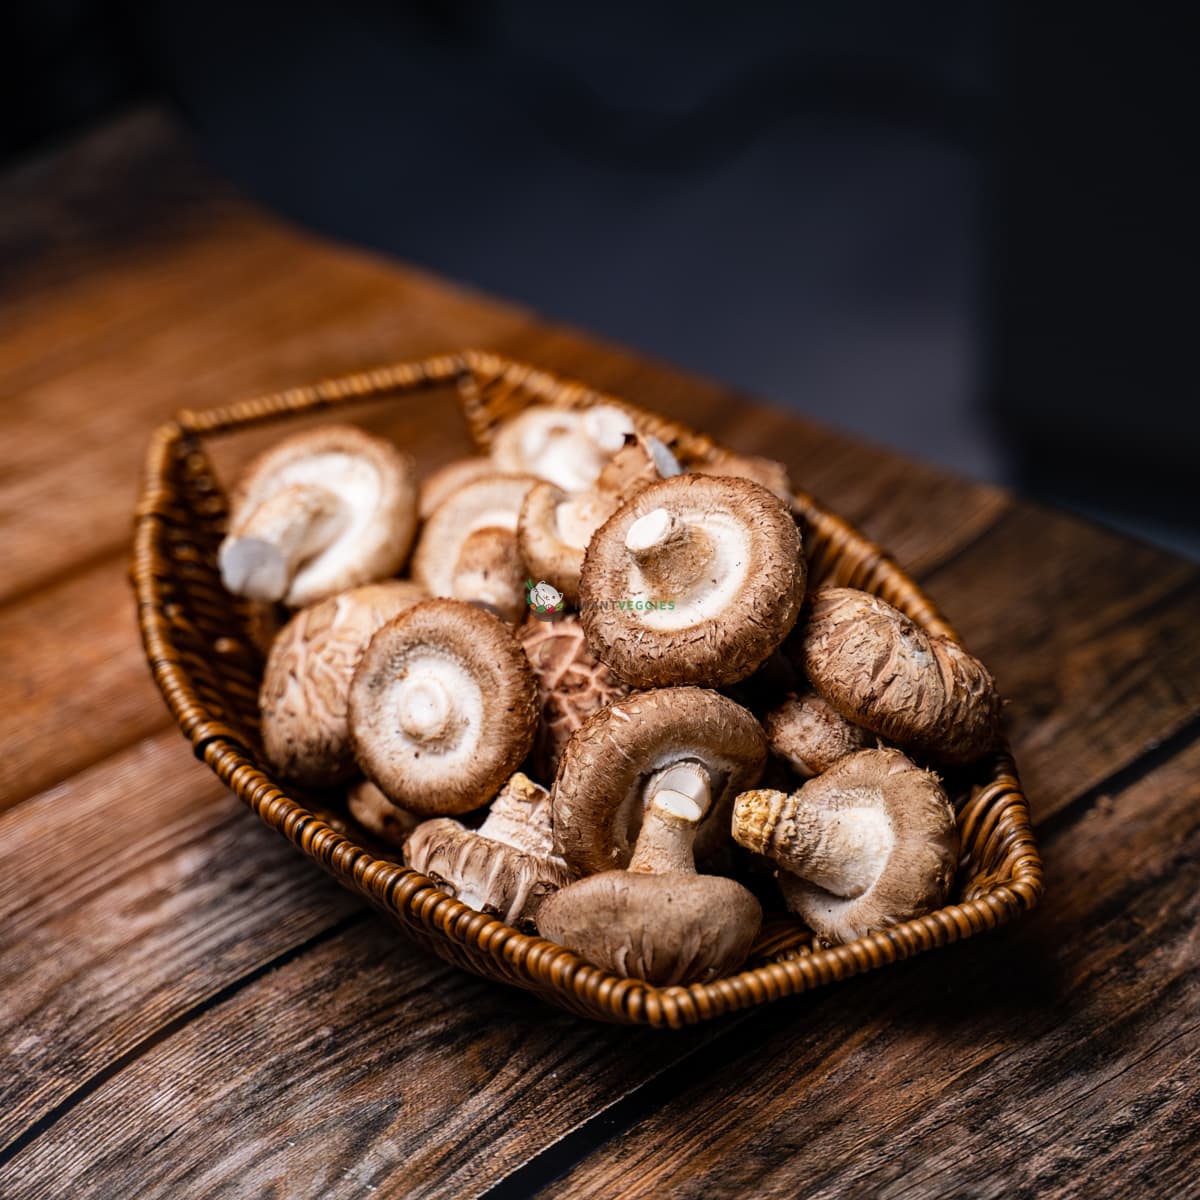 Basket of shiitake mushrooms on wood surface - brown caps, white stems. Fresh, earthy, and nutritious.